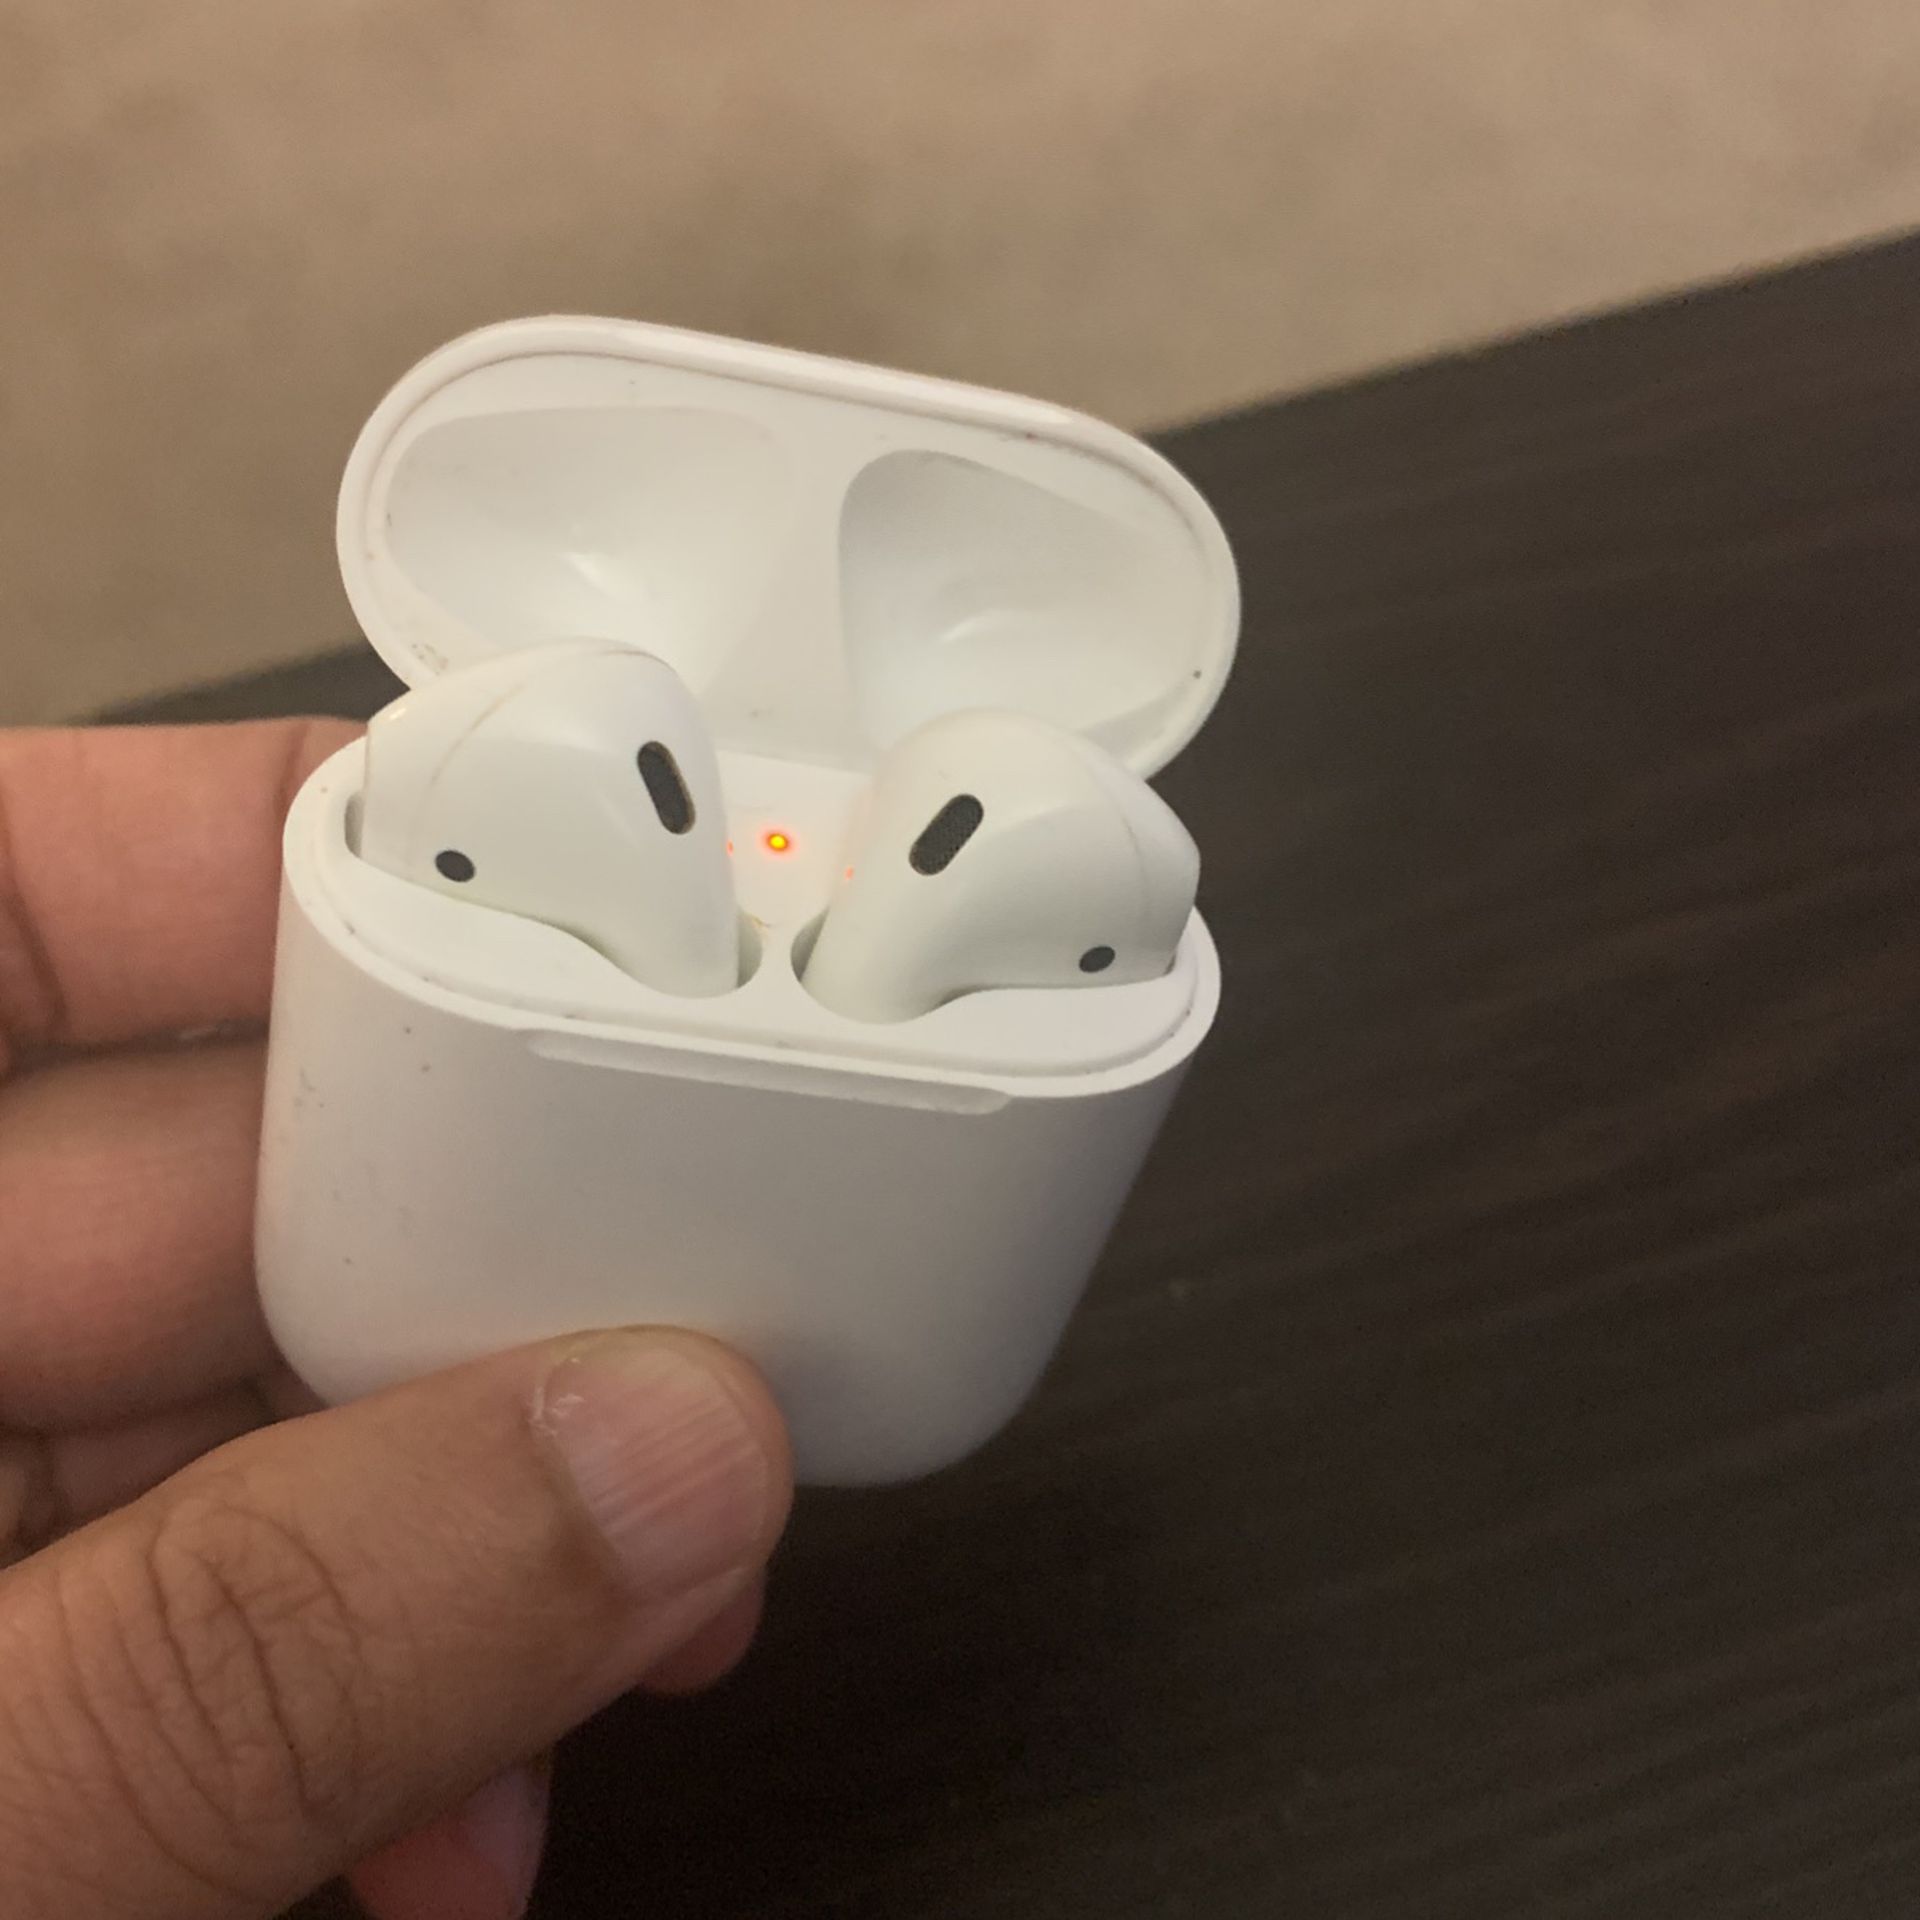 Rarely Used Apple AirPod Gen 1 With Case And Charger